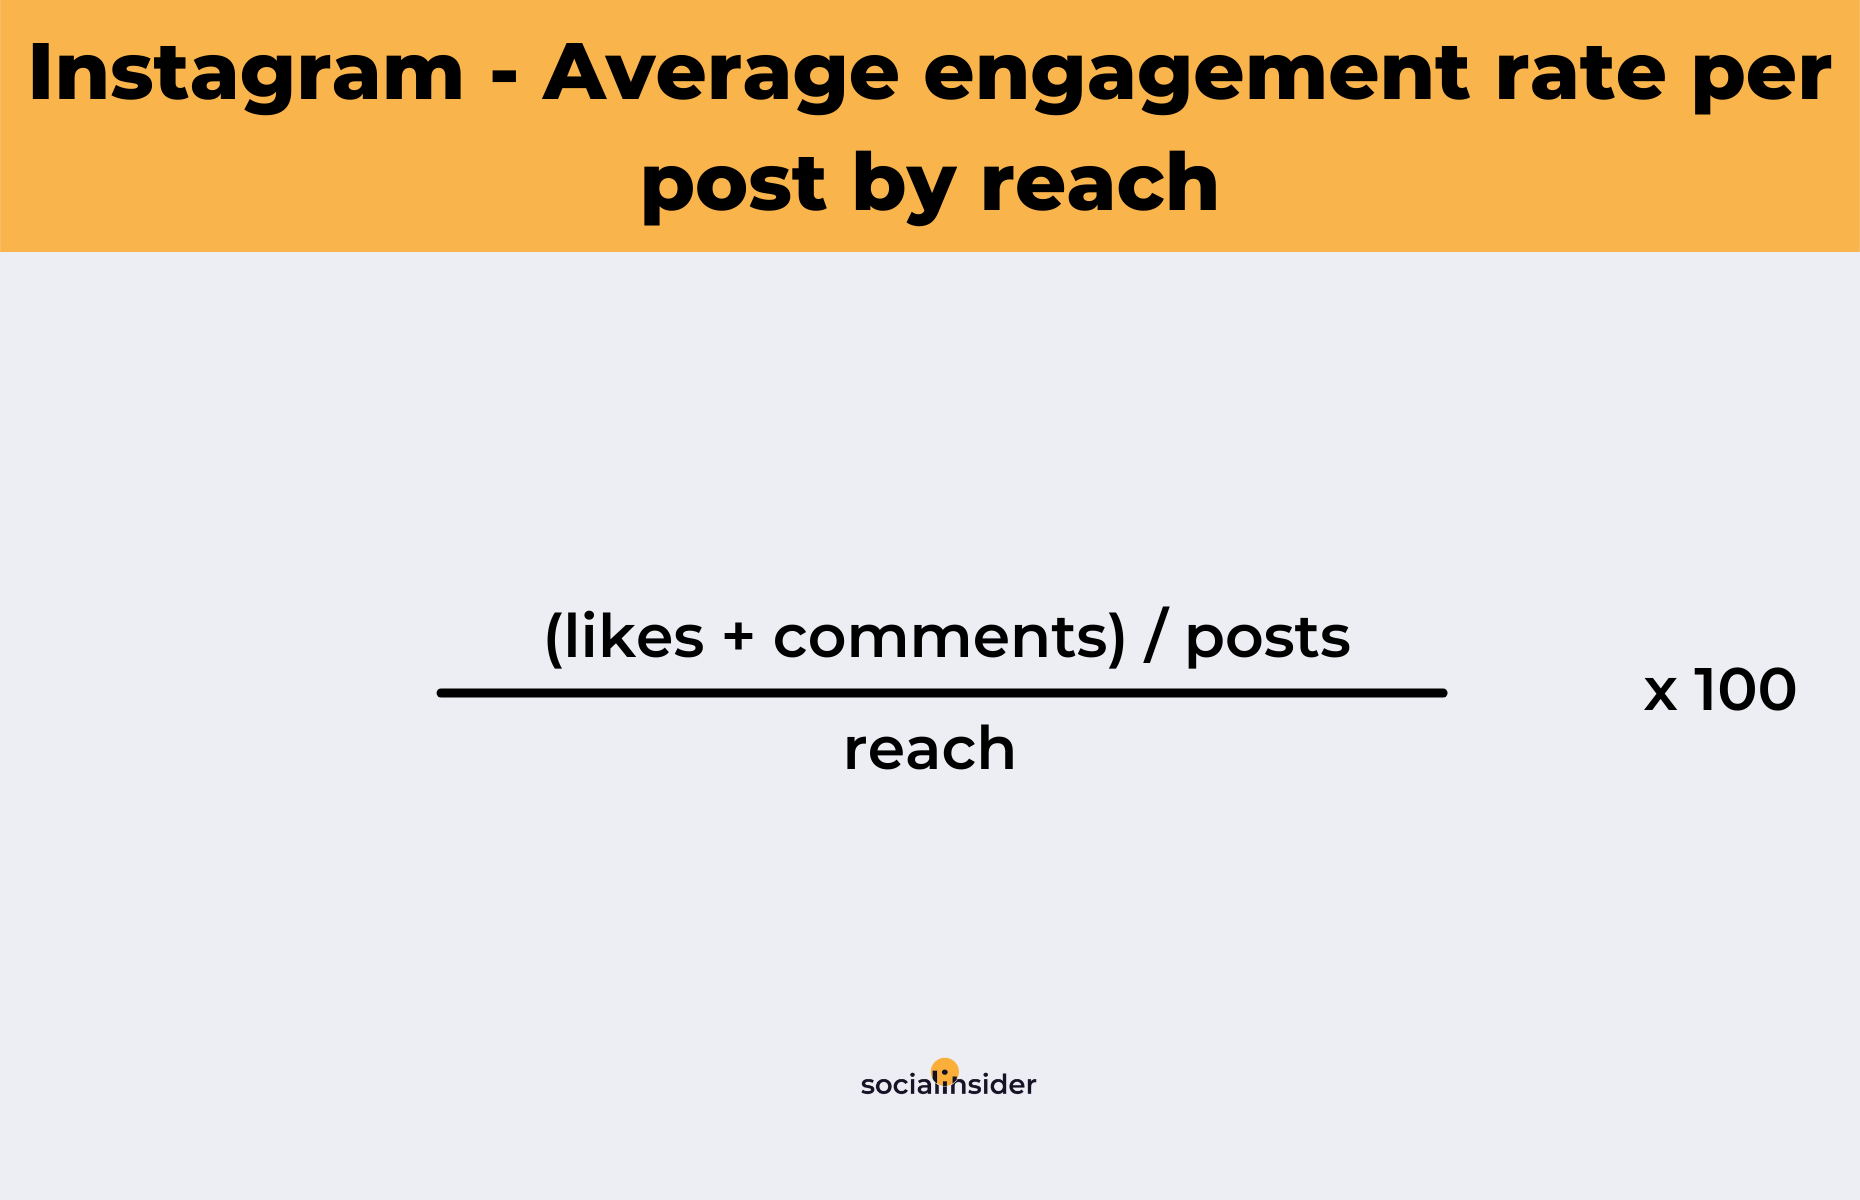 How to calculate the average engagement rate per post by reach on Instagram